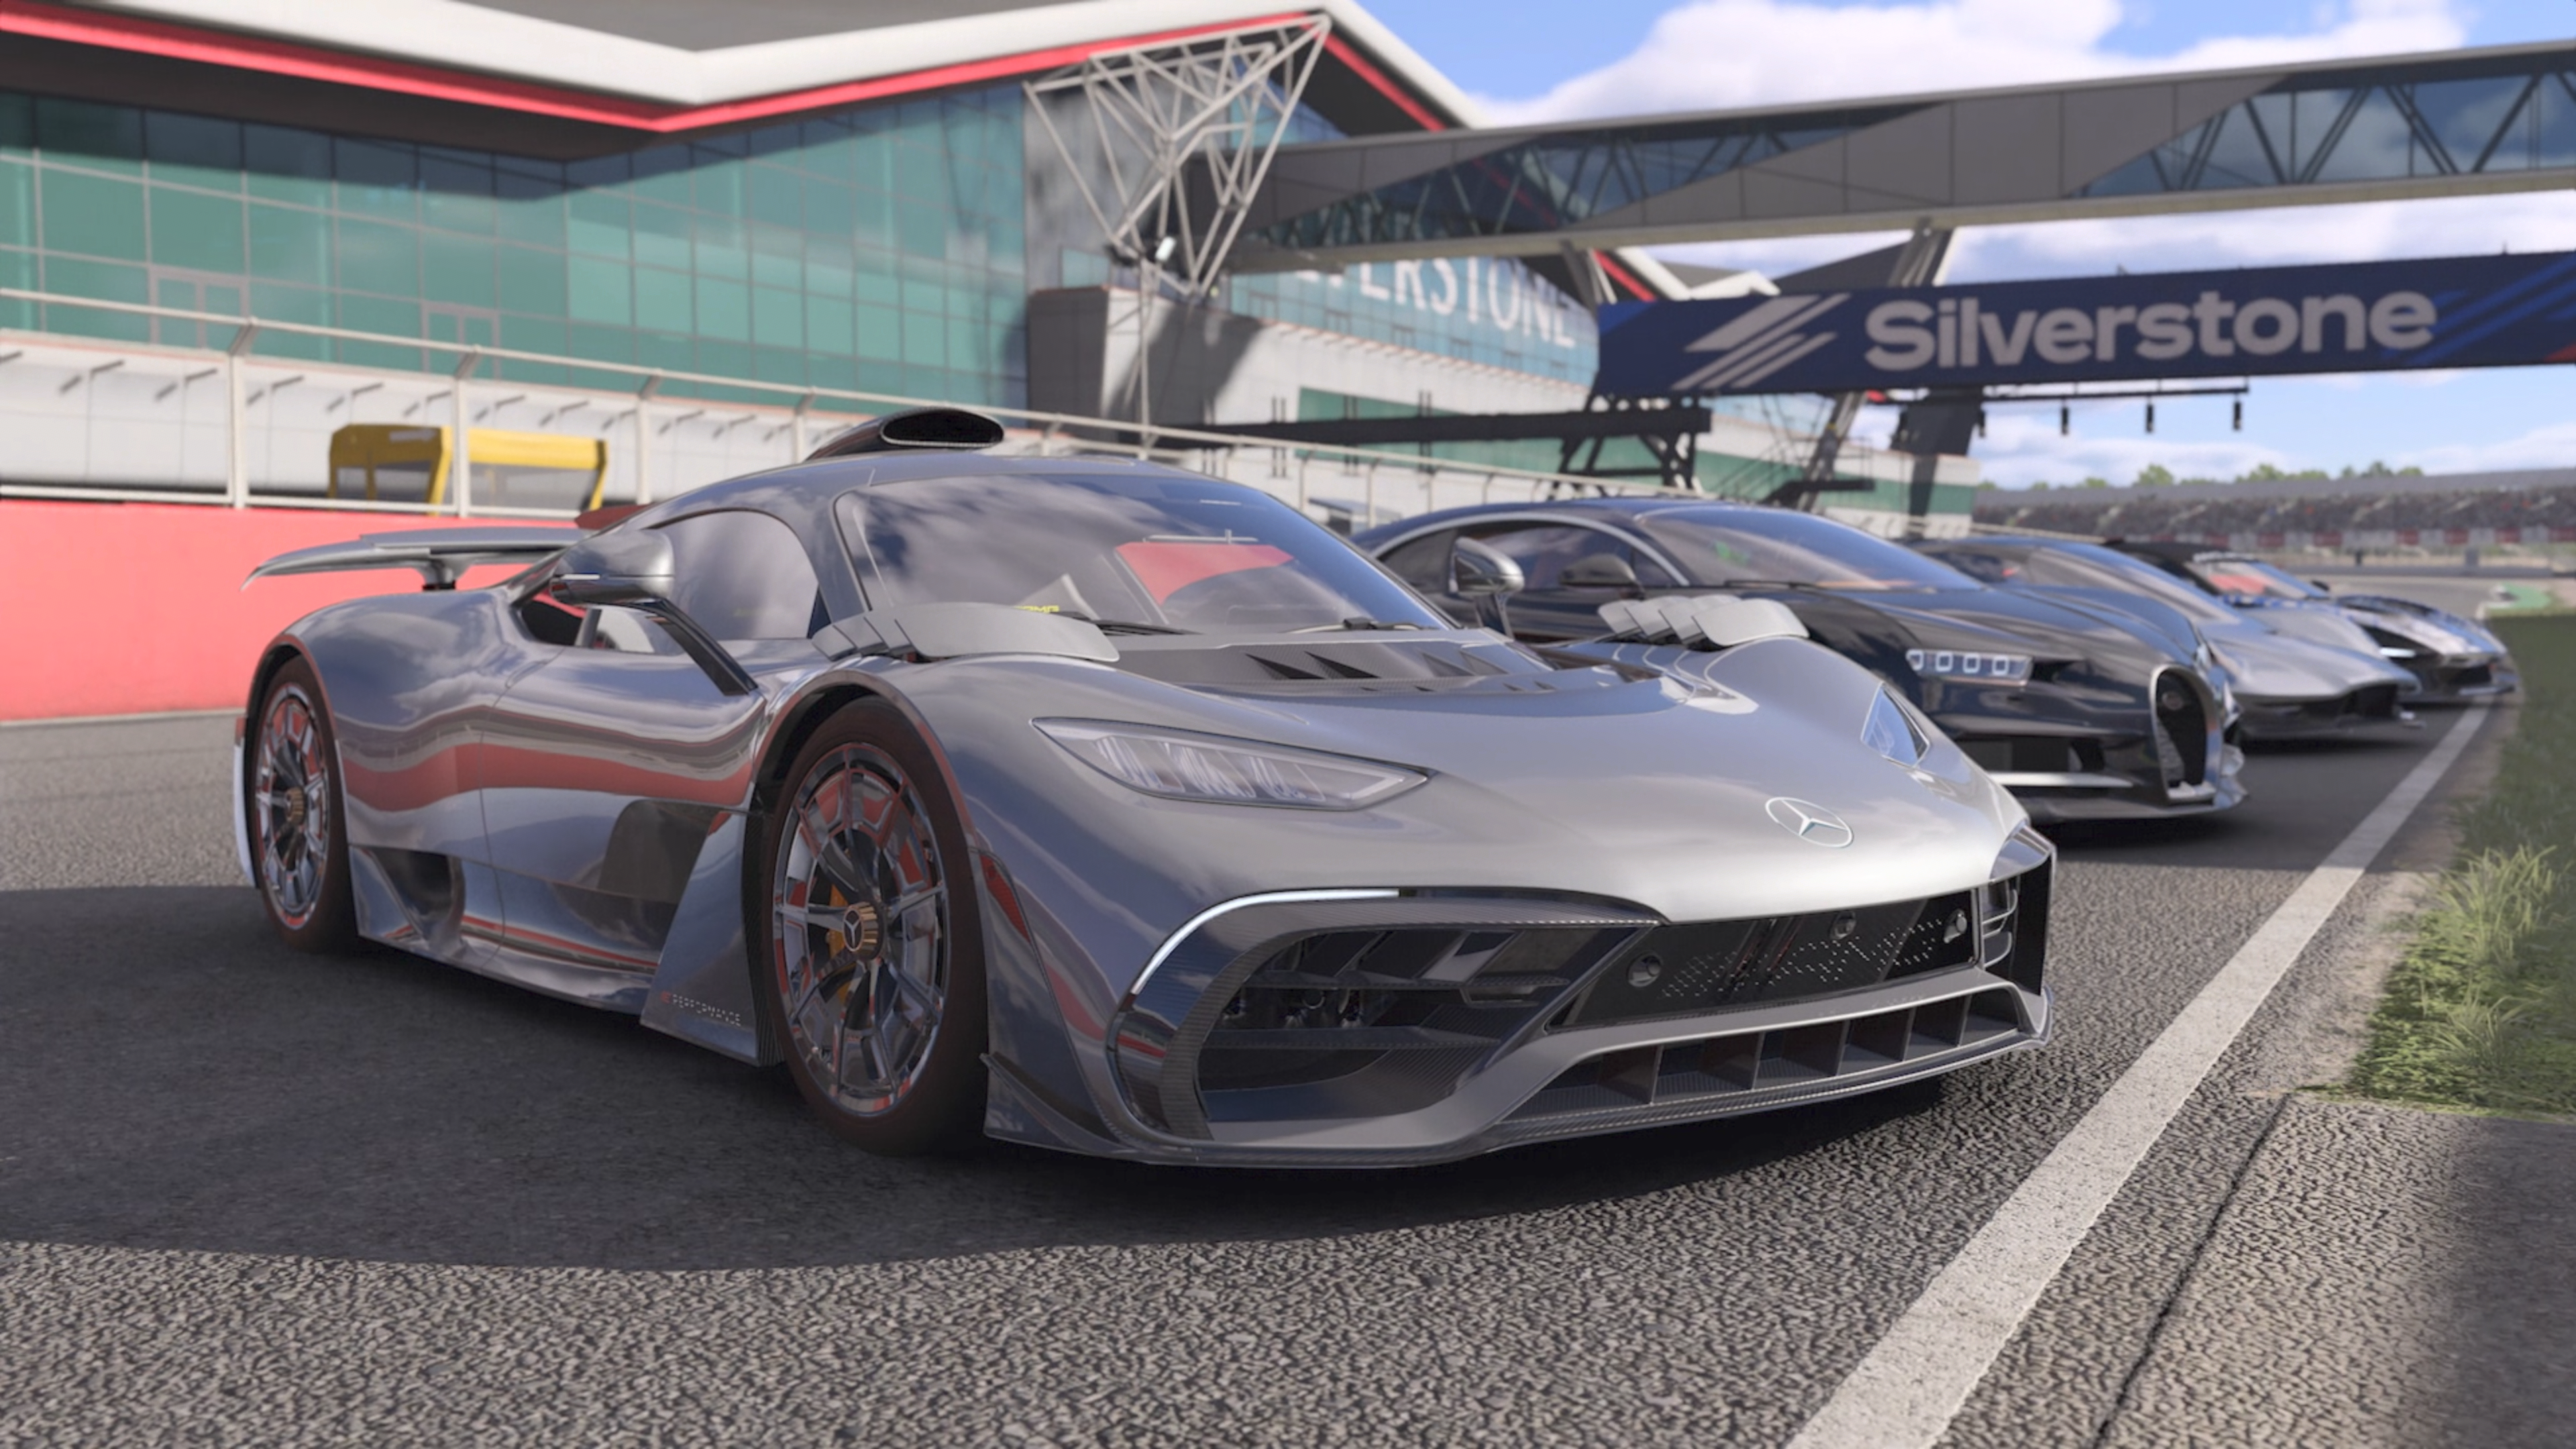 Forza Motorsport 8: How to Level Up Cars Fast